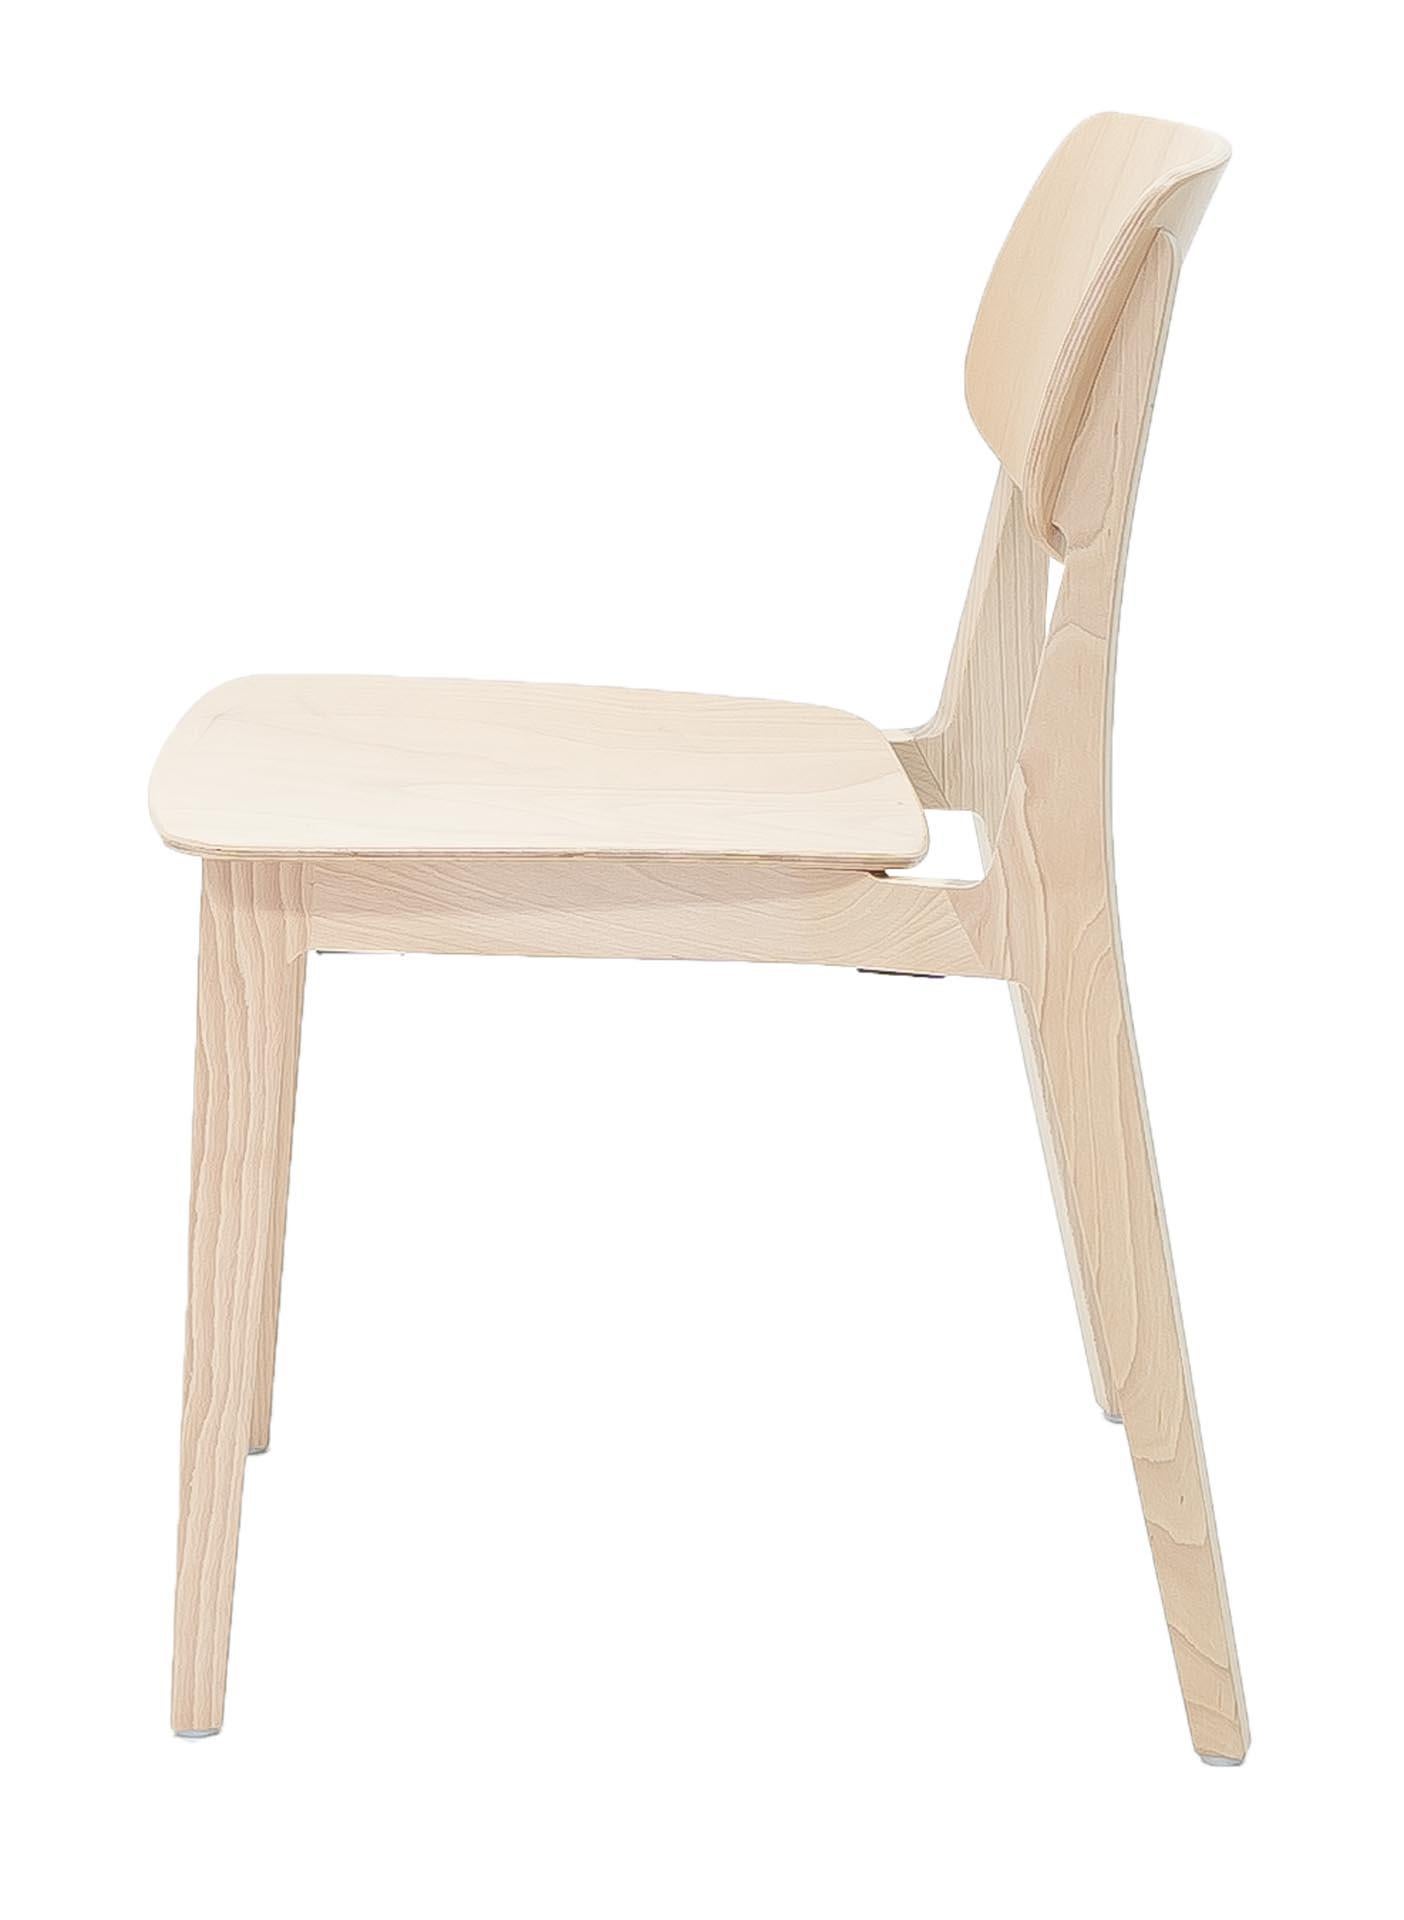 Hungarian Felber C14 Beech wood Chairs by Dietiker, Exchangeable Back and Seat, Set of 4 For Sale